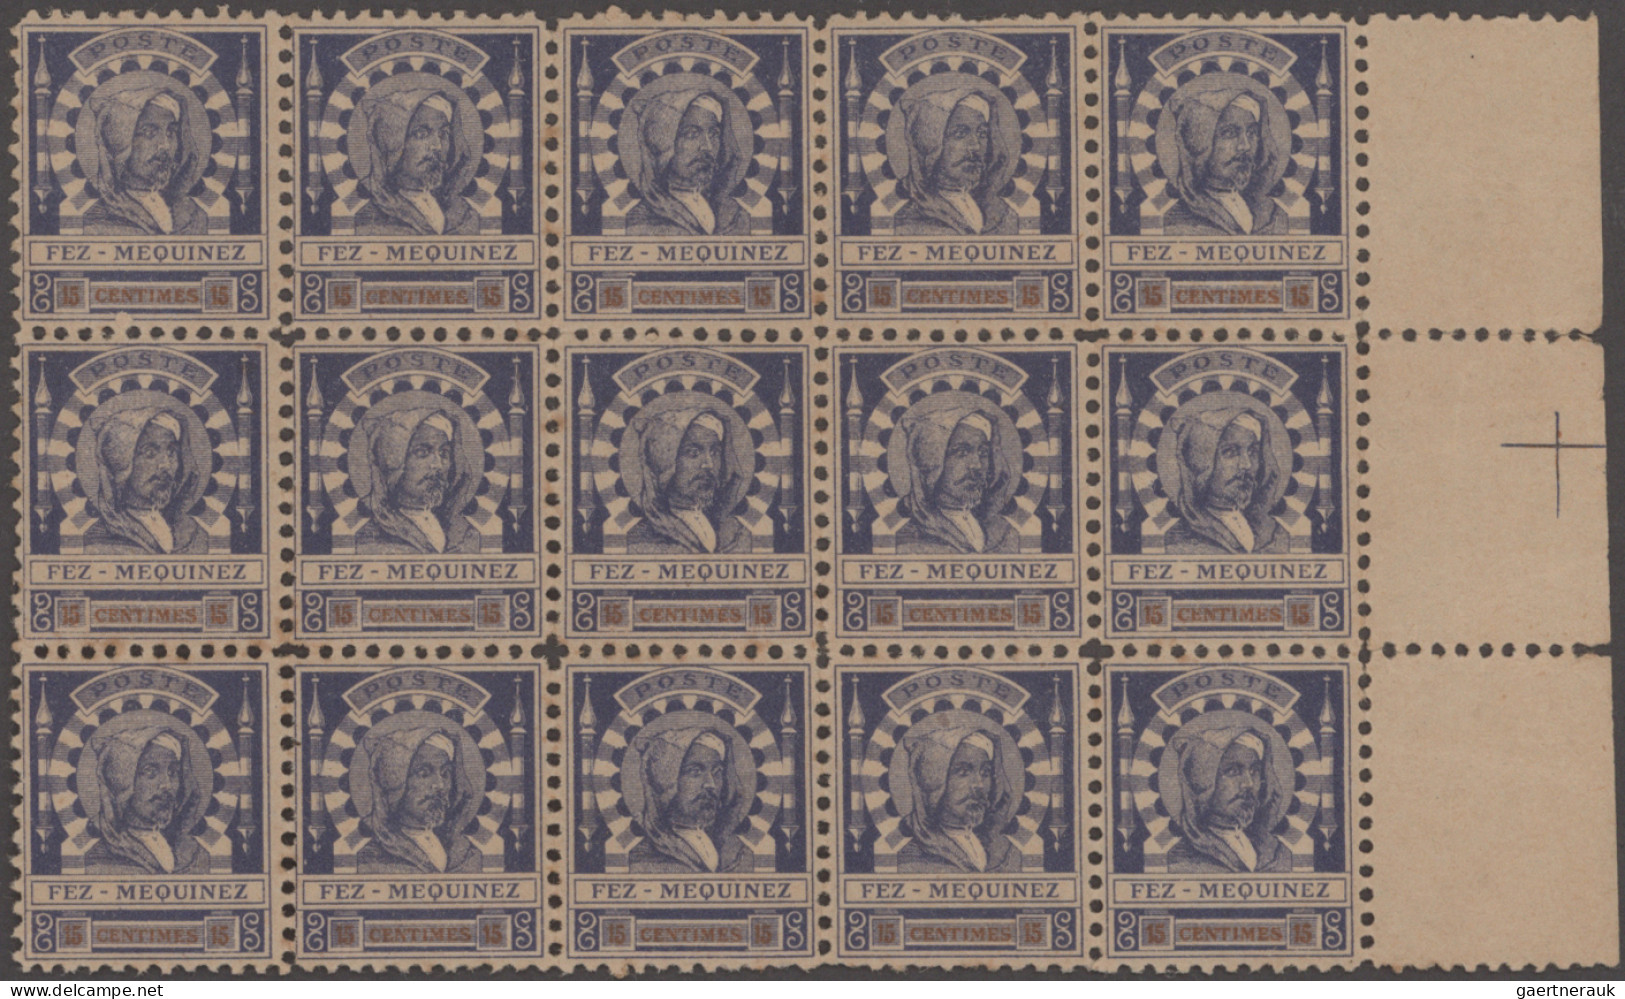 Morocco: 1900 Mogador-Agadir: Collection of about 230 mint stamps of all denomin